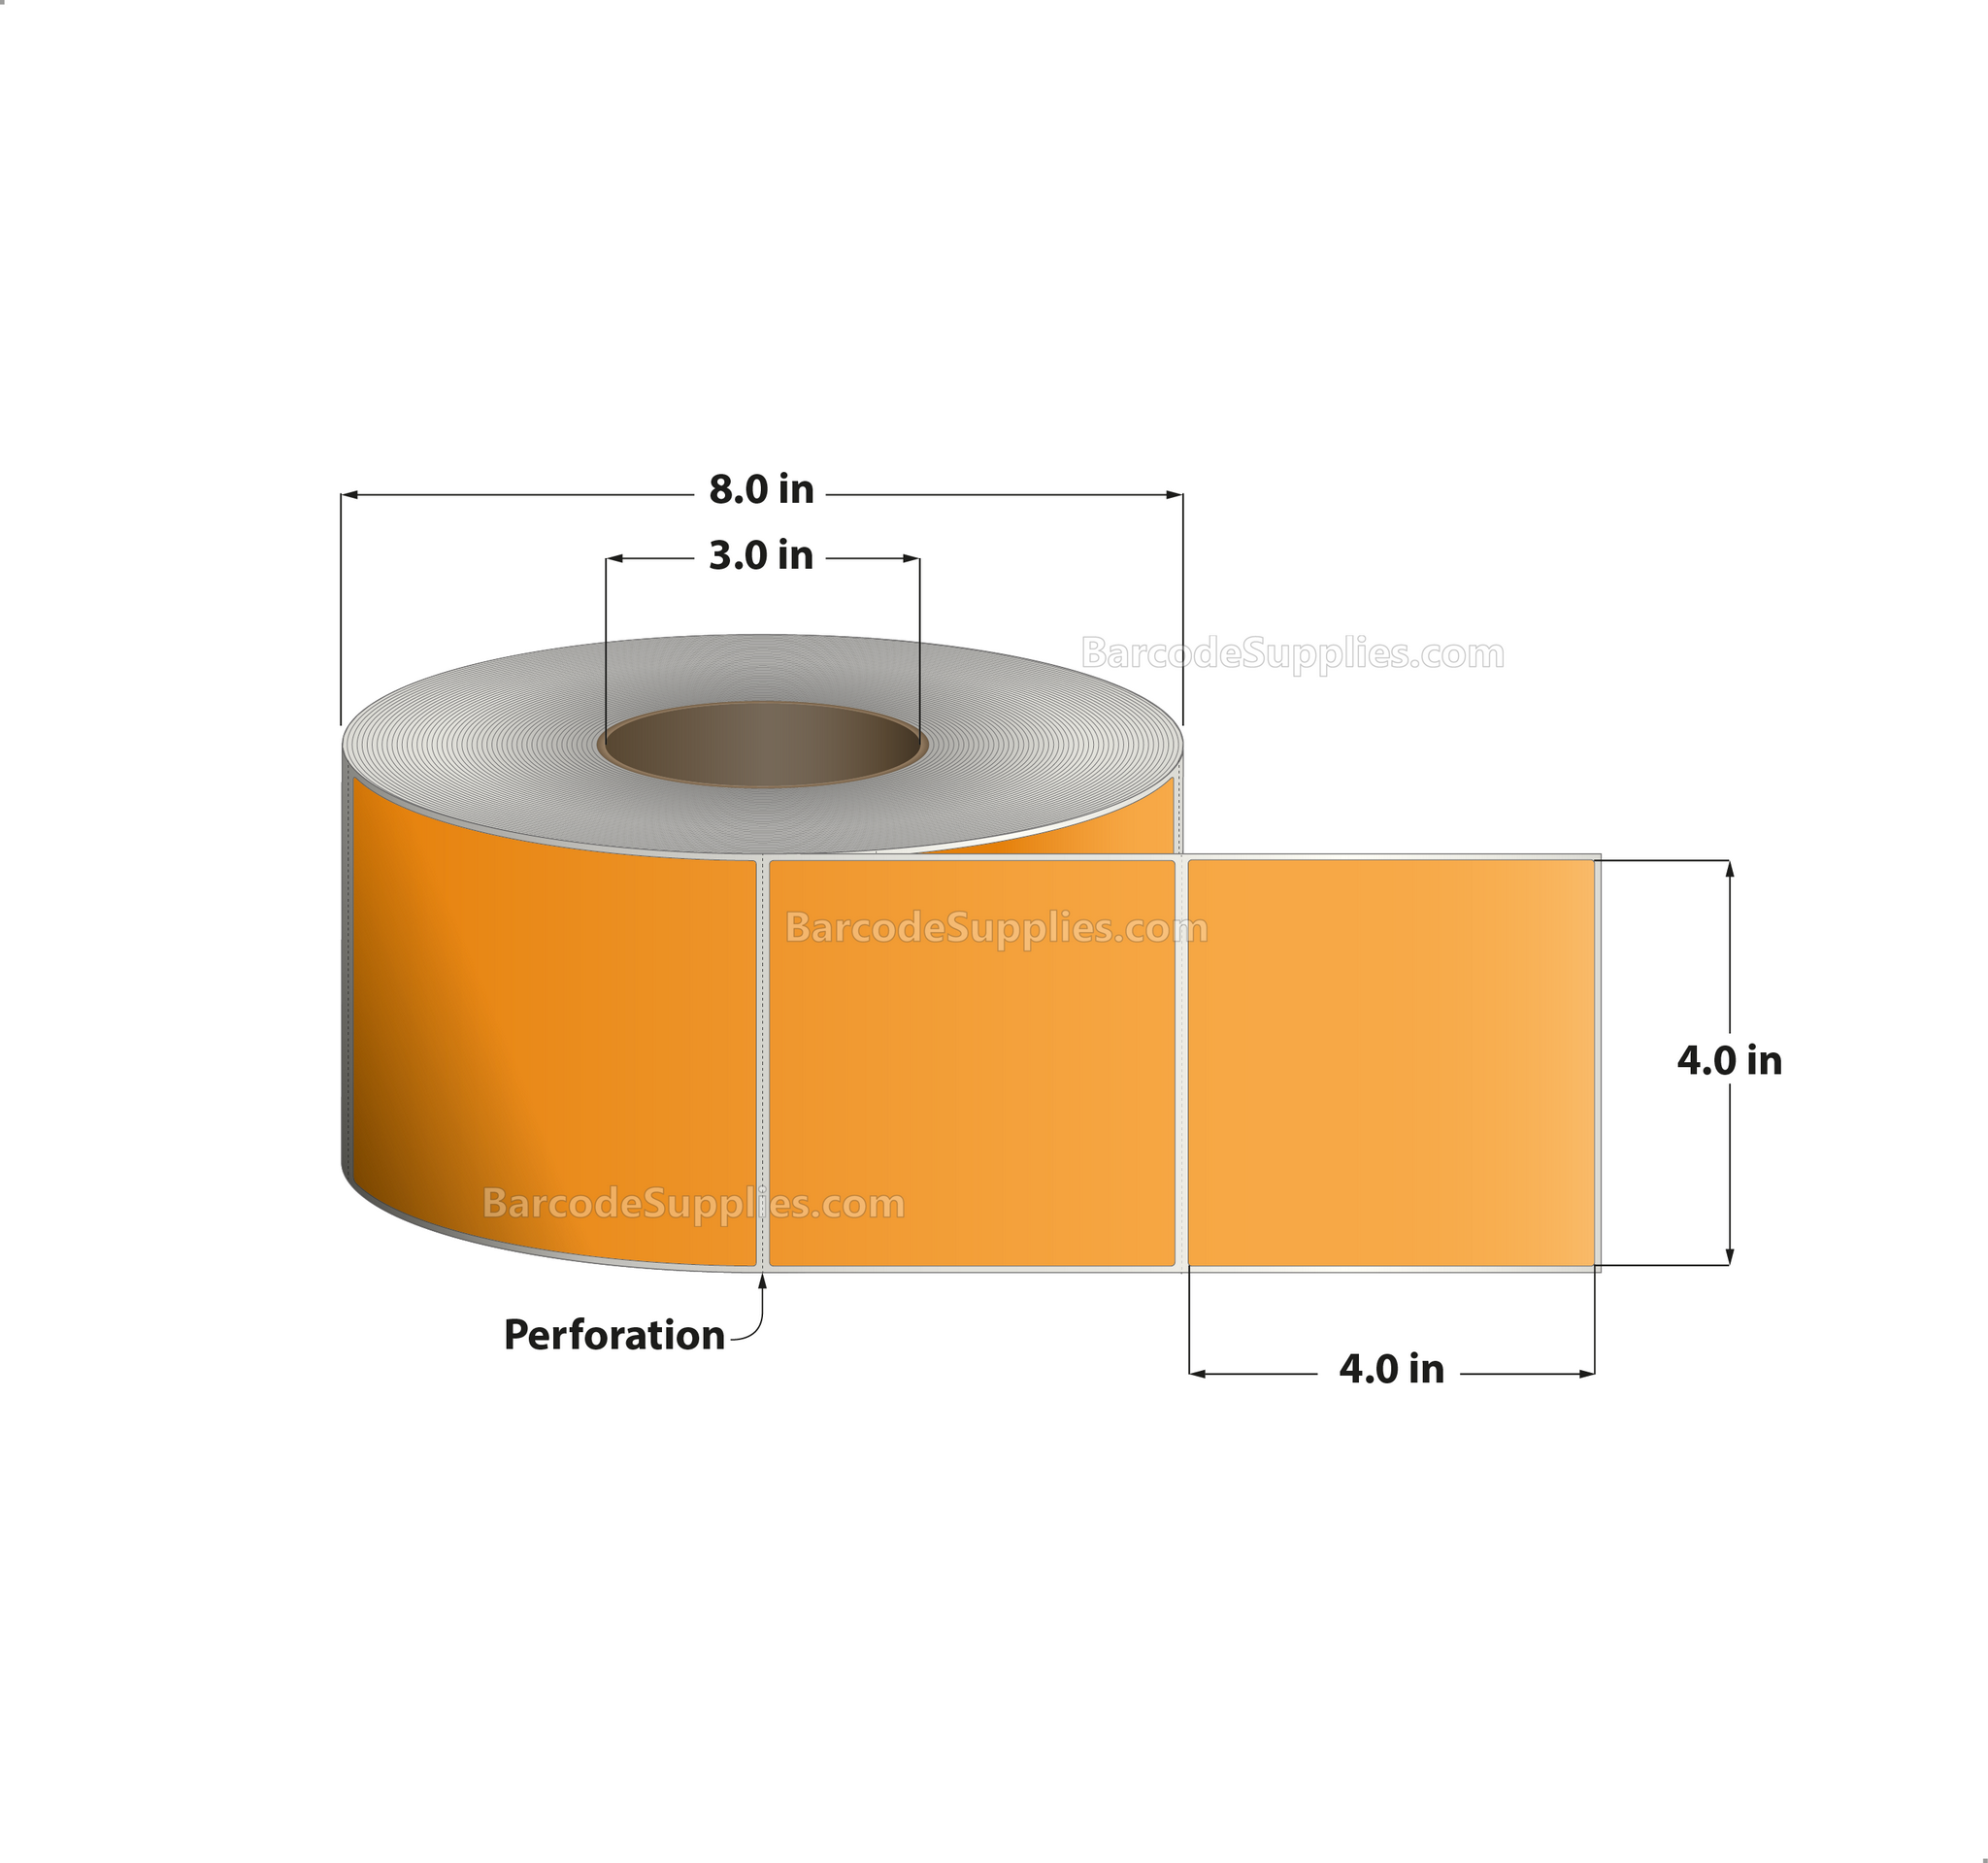 4 x 4 Thermal Transfer 136 Orange Labels With Permanent Acrylic Adhesive - Perforated - 1500 Labels Per Roll - Carton Of 4 Rolls - 6000 Labels Total - MPN: TH44-1PO